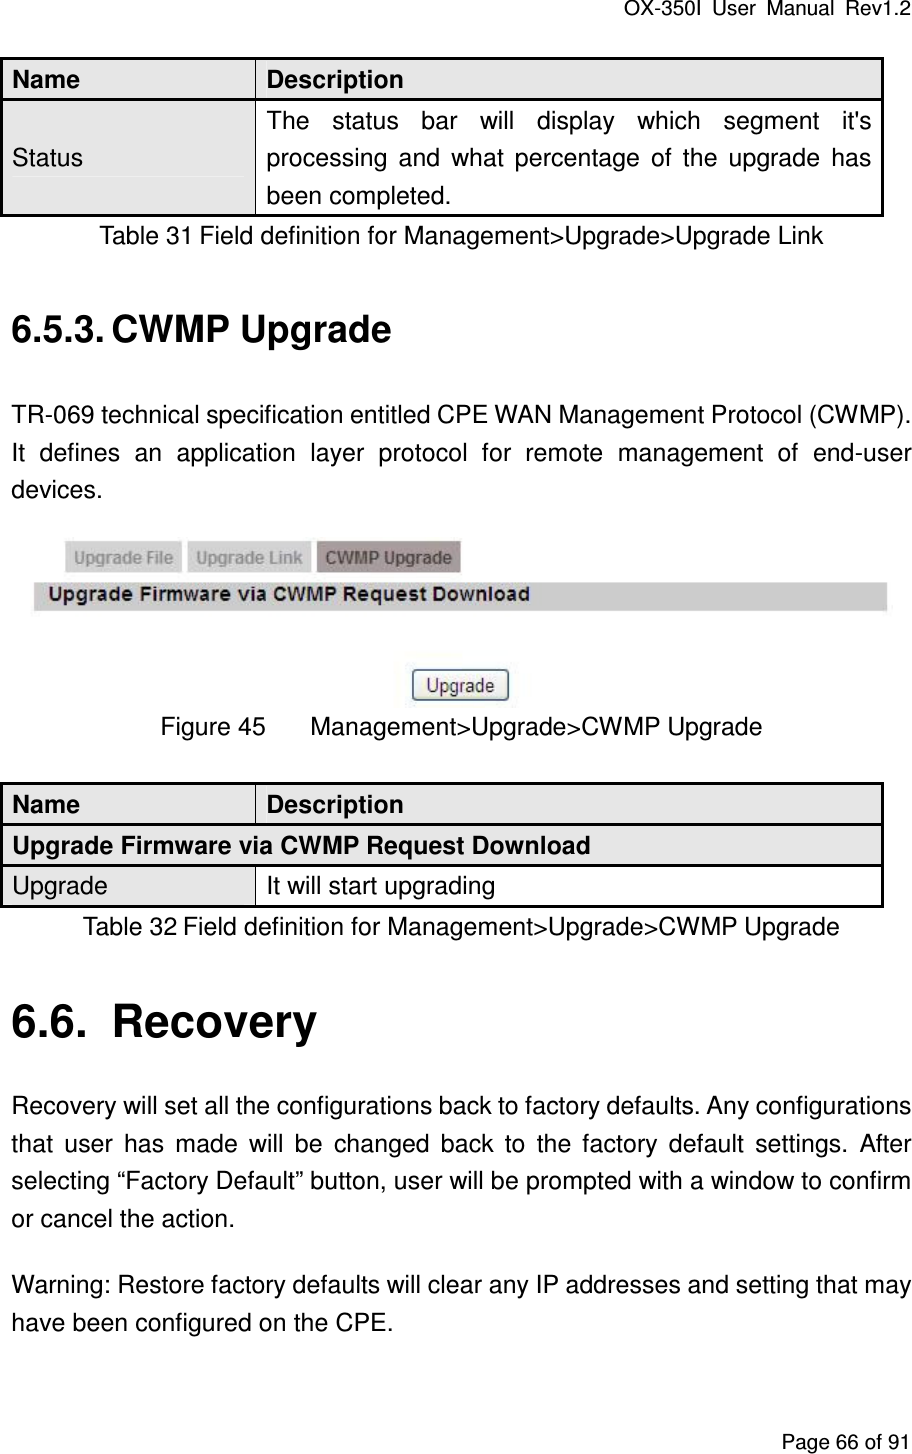 OX-350I  User  Manual  Rev1.2 Page 66 of 91 Name  Description Status The  status  bar  will  display  which  segment  it&apos;s processing  and  what  percentage  of  the  upgrade  has been completed. Table 31 Field definition for Management&gt;Upgrade&gt;Upgrade Link 6.5.3. CWMP Upgrade TR-069 technical specification entitled CPE WAN Management Protocol (CWMP). It  defines  an  application  layer  protocol  for  remote  management  of  end-user devices.  Figure 45  Management&gt;Upgrade&gt;CWMP Upgrade Name  Description Upgrade Firmware via CWMP Request Download Upgrade  It will start upgrading Table 32 Field definition for Management&gt;Upgrade&gt;CWMP Upgrade 6.6.  Recovery Recovery will set all the configurations back to factory defaults. Any configurations that  user  has  made  will  be  changed  back  to  the  factory  default  settings.  After selecting “Factory Default” button, user will be prompted with a window to confirm or cancel the action. Warning: Restore factory defaults will clear any IP addresses and setting that may have been configured on the CPE. 